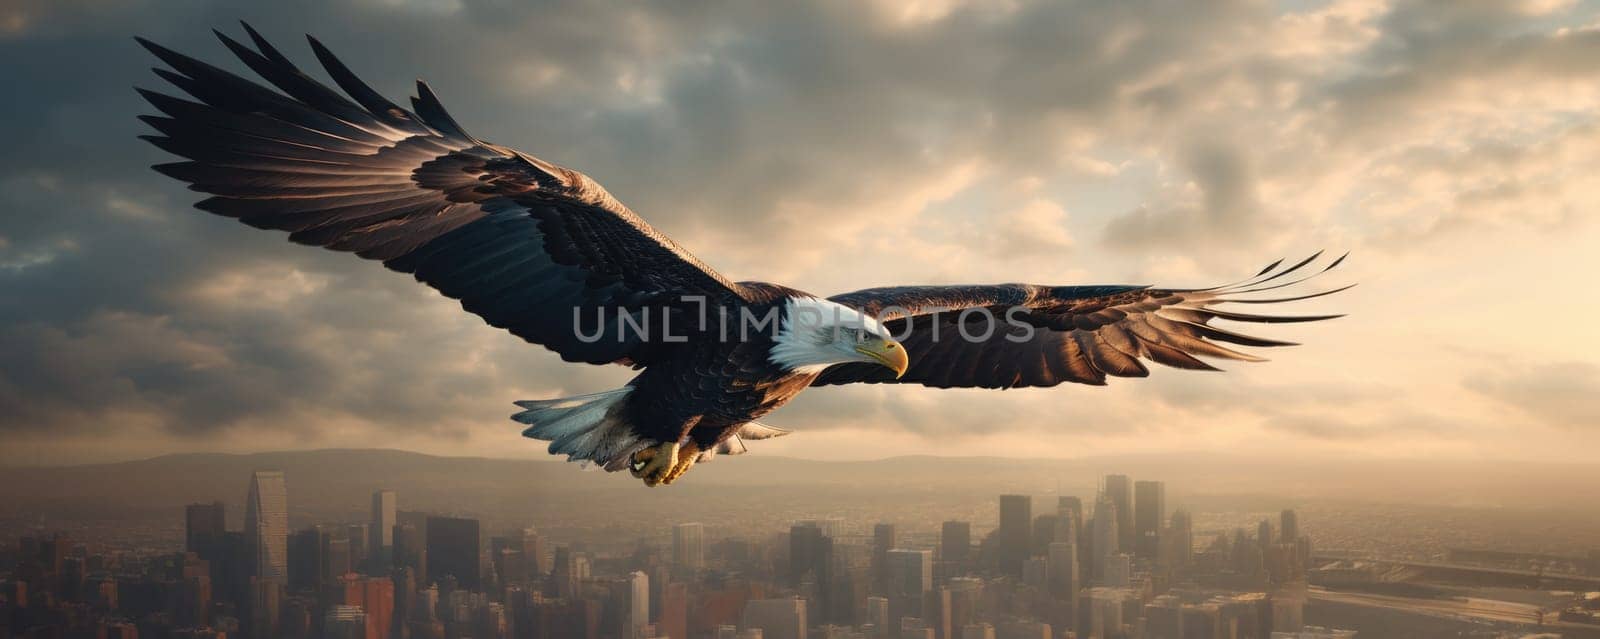 A bald eagle soars over city buildings. by palinchak